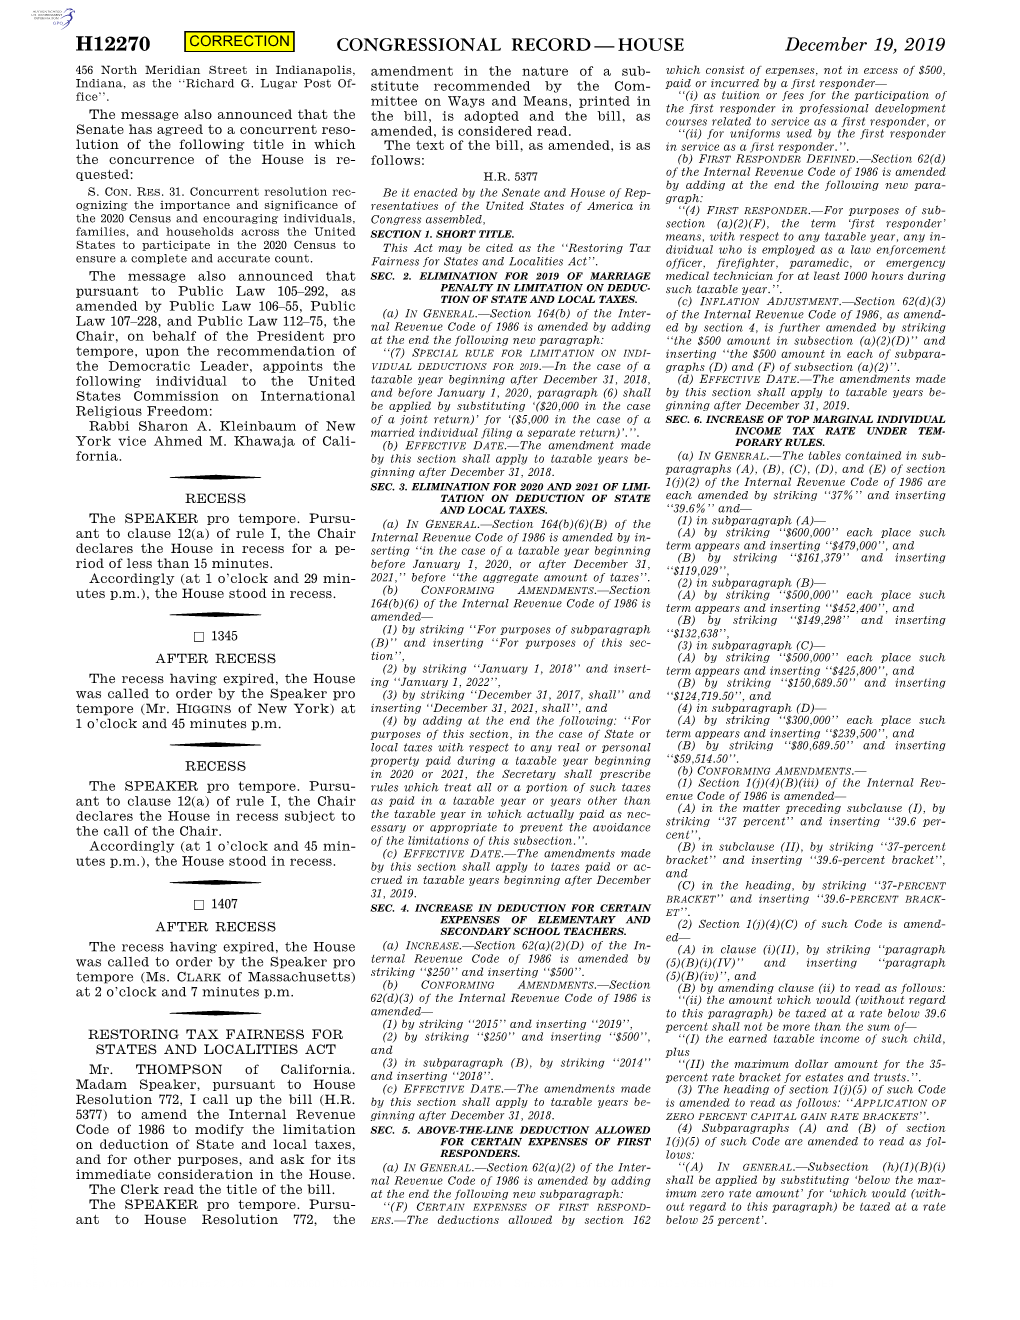 Congressional Record—House H12270